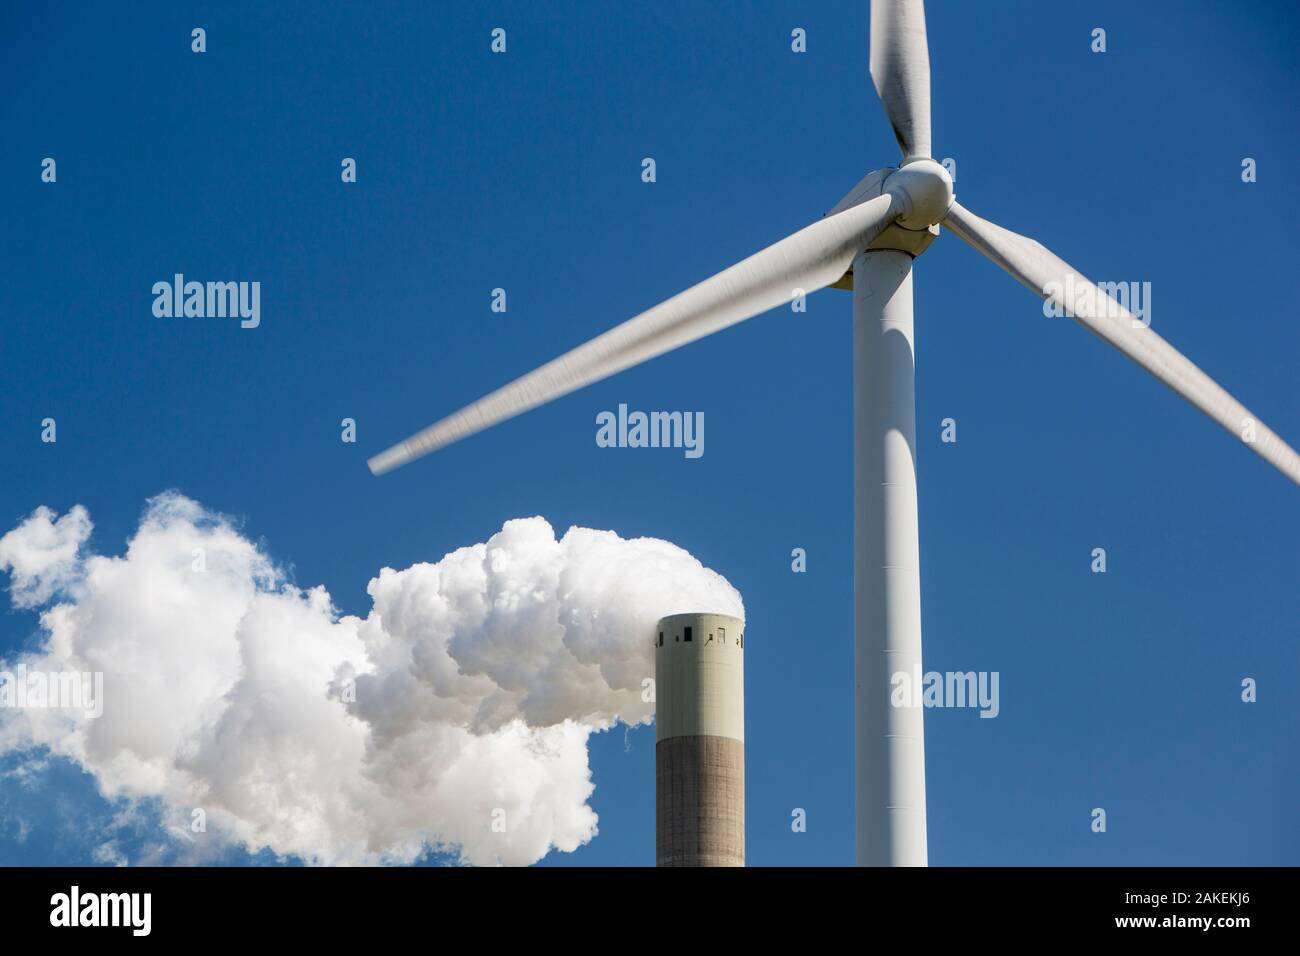 Wind turbine with stacks of coal fired power station in Amsterdam, Netherlands. May 2013 Stock Photo